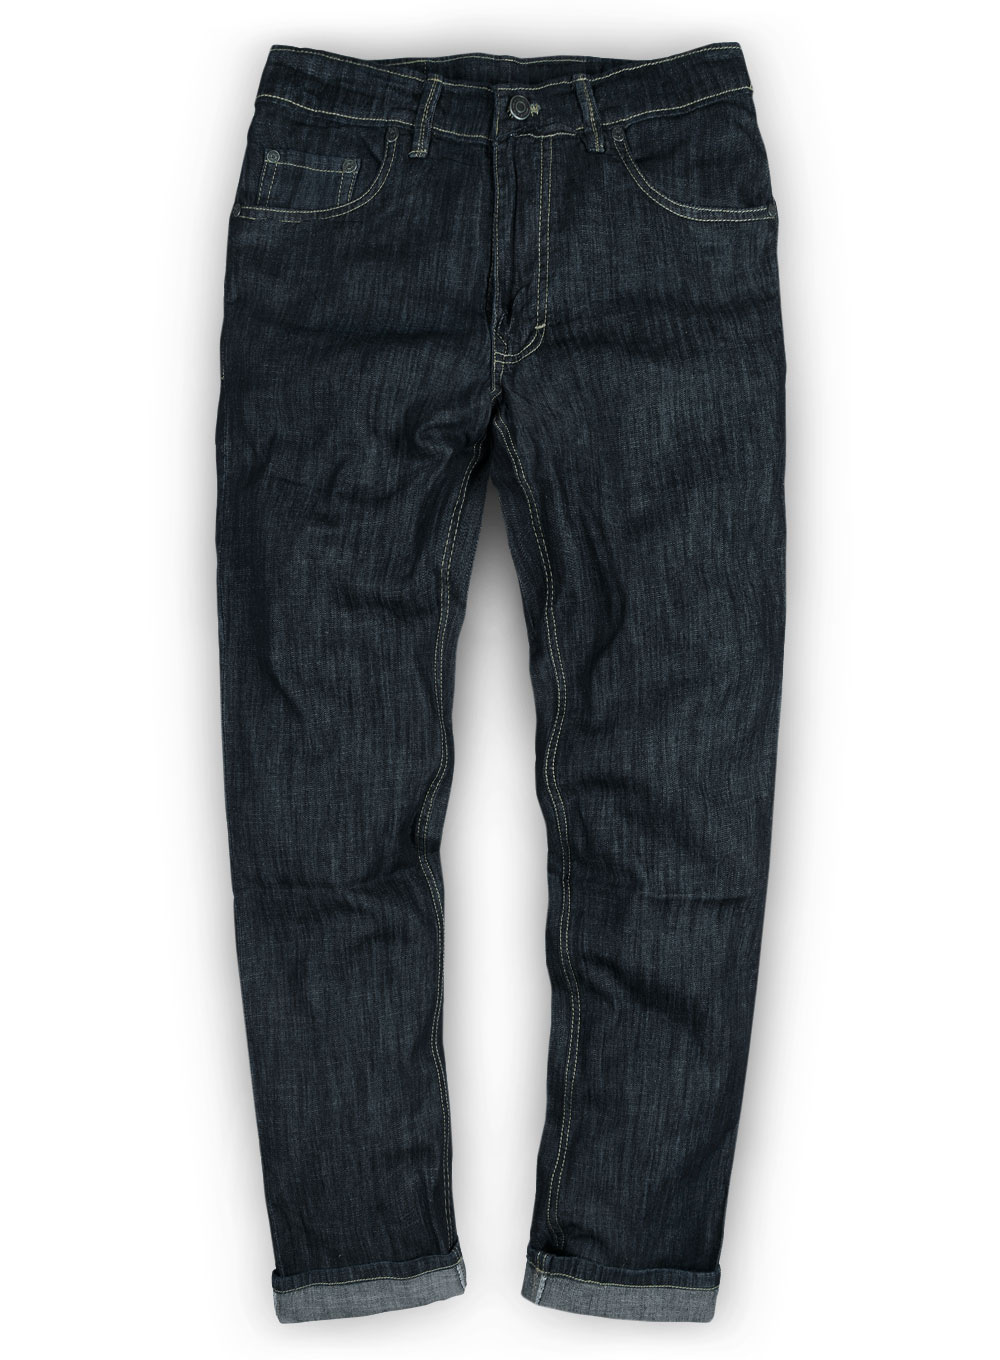 6oz Feather Light Weight Jeans - Hard Wash : Made To Measure Custom Jeans  For Men & Women, MakeYourOwnJeans®